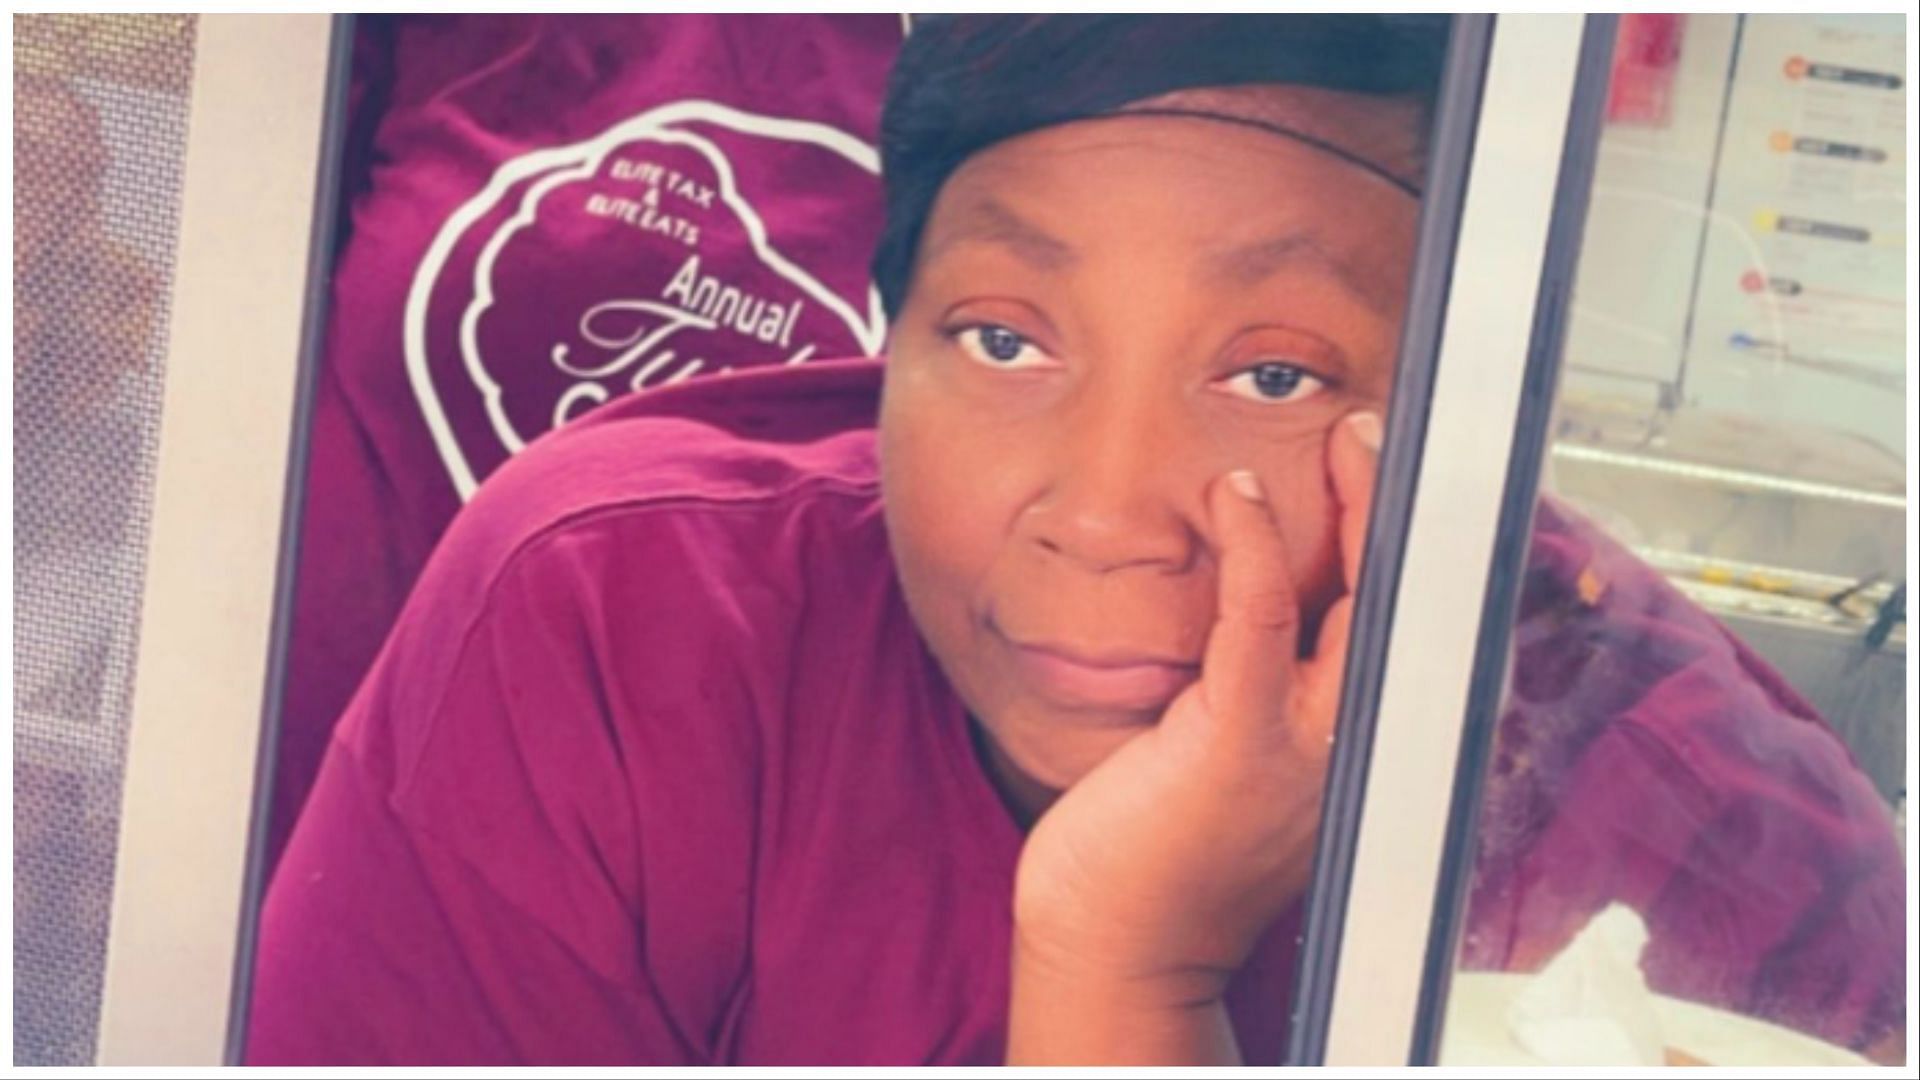 53-year-old woman killed an armed robber who tried to attack her food truck, (Image via @MattKHOU/Twitter)